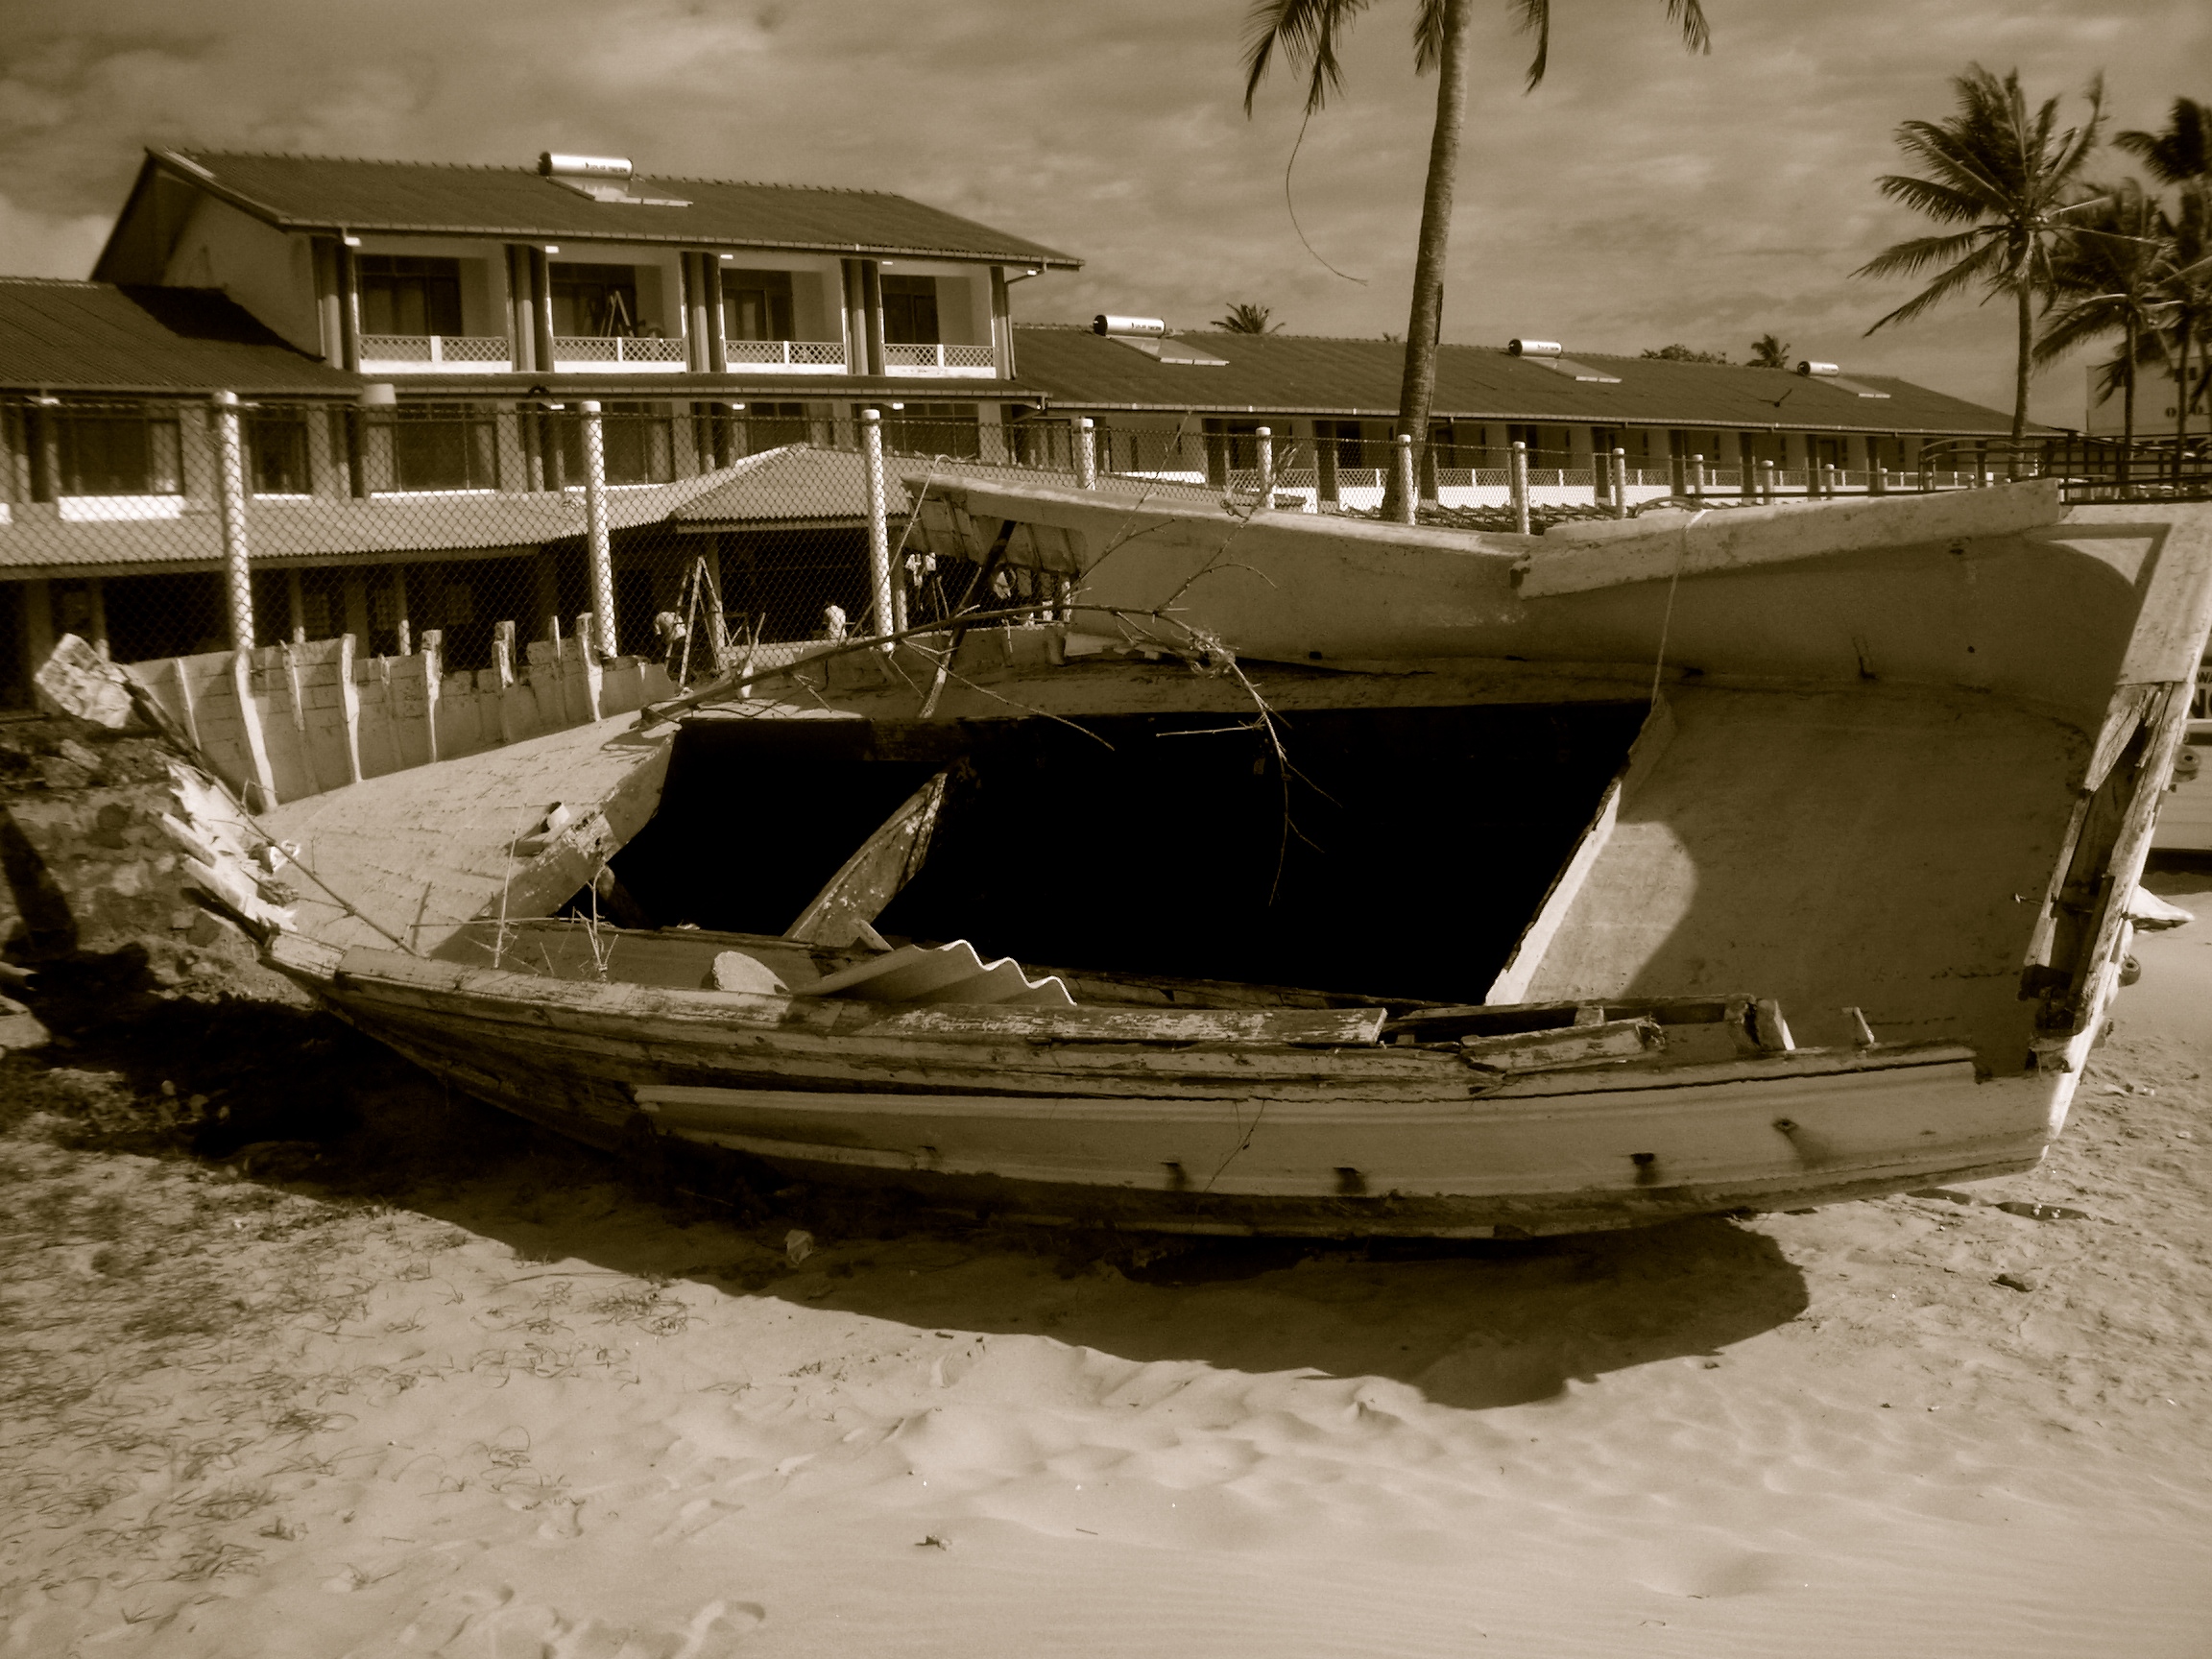 A boat lies in ruins on a beach in the South.